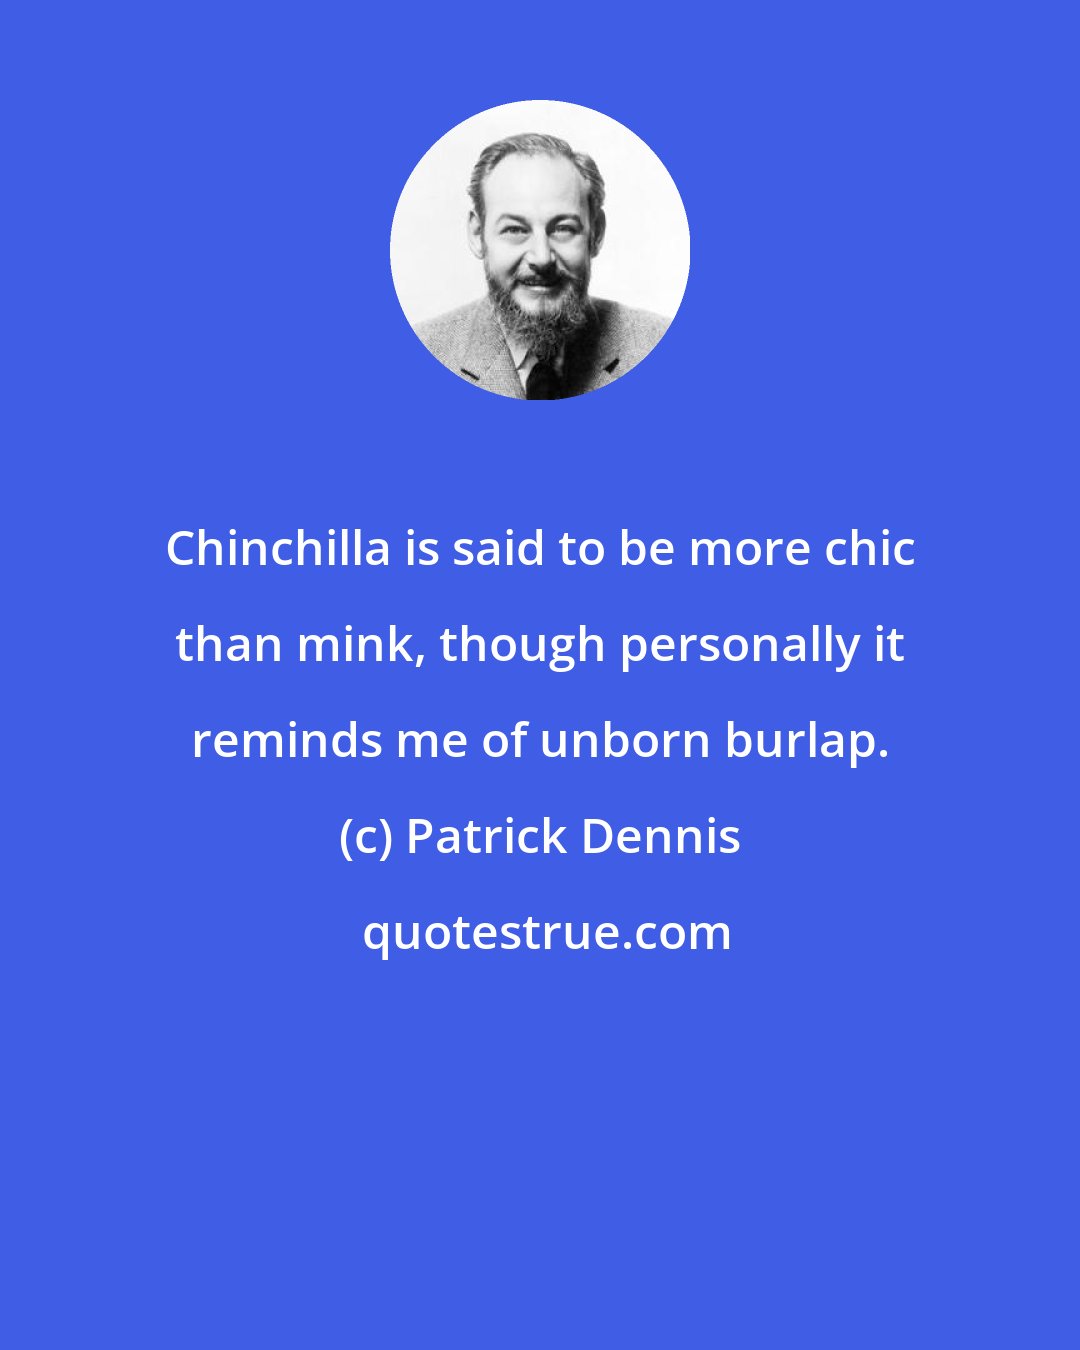 Patrick Dennis: Chinchilla is said to be more chic than mink, though personally it reminds me of unborn burlap.